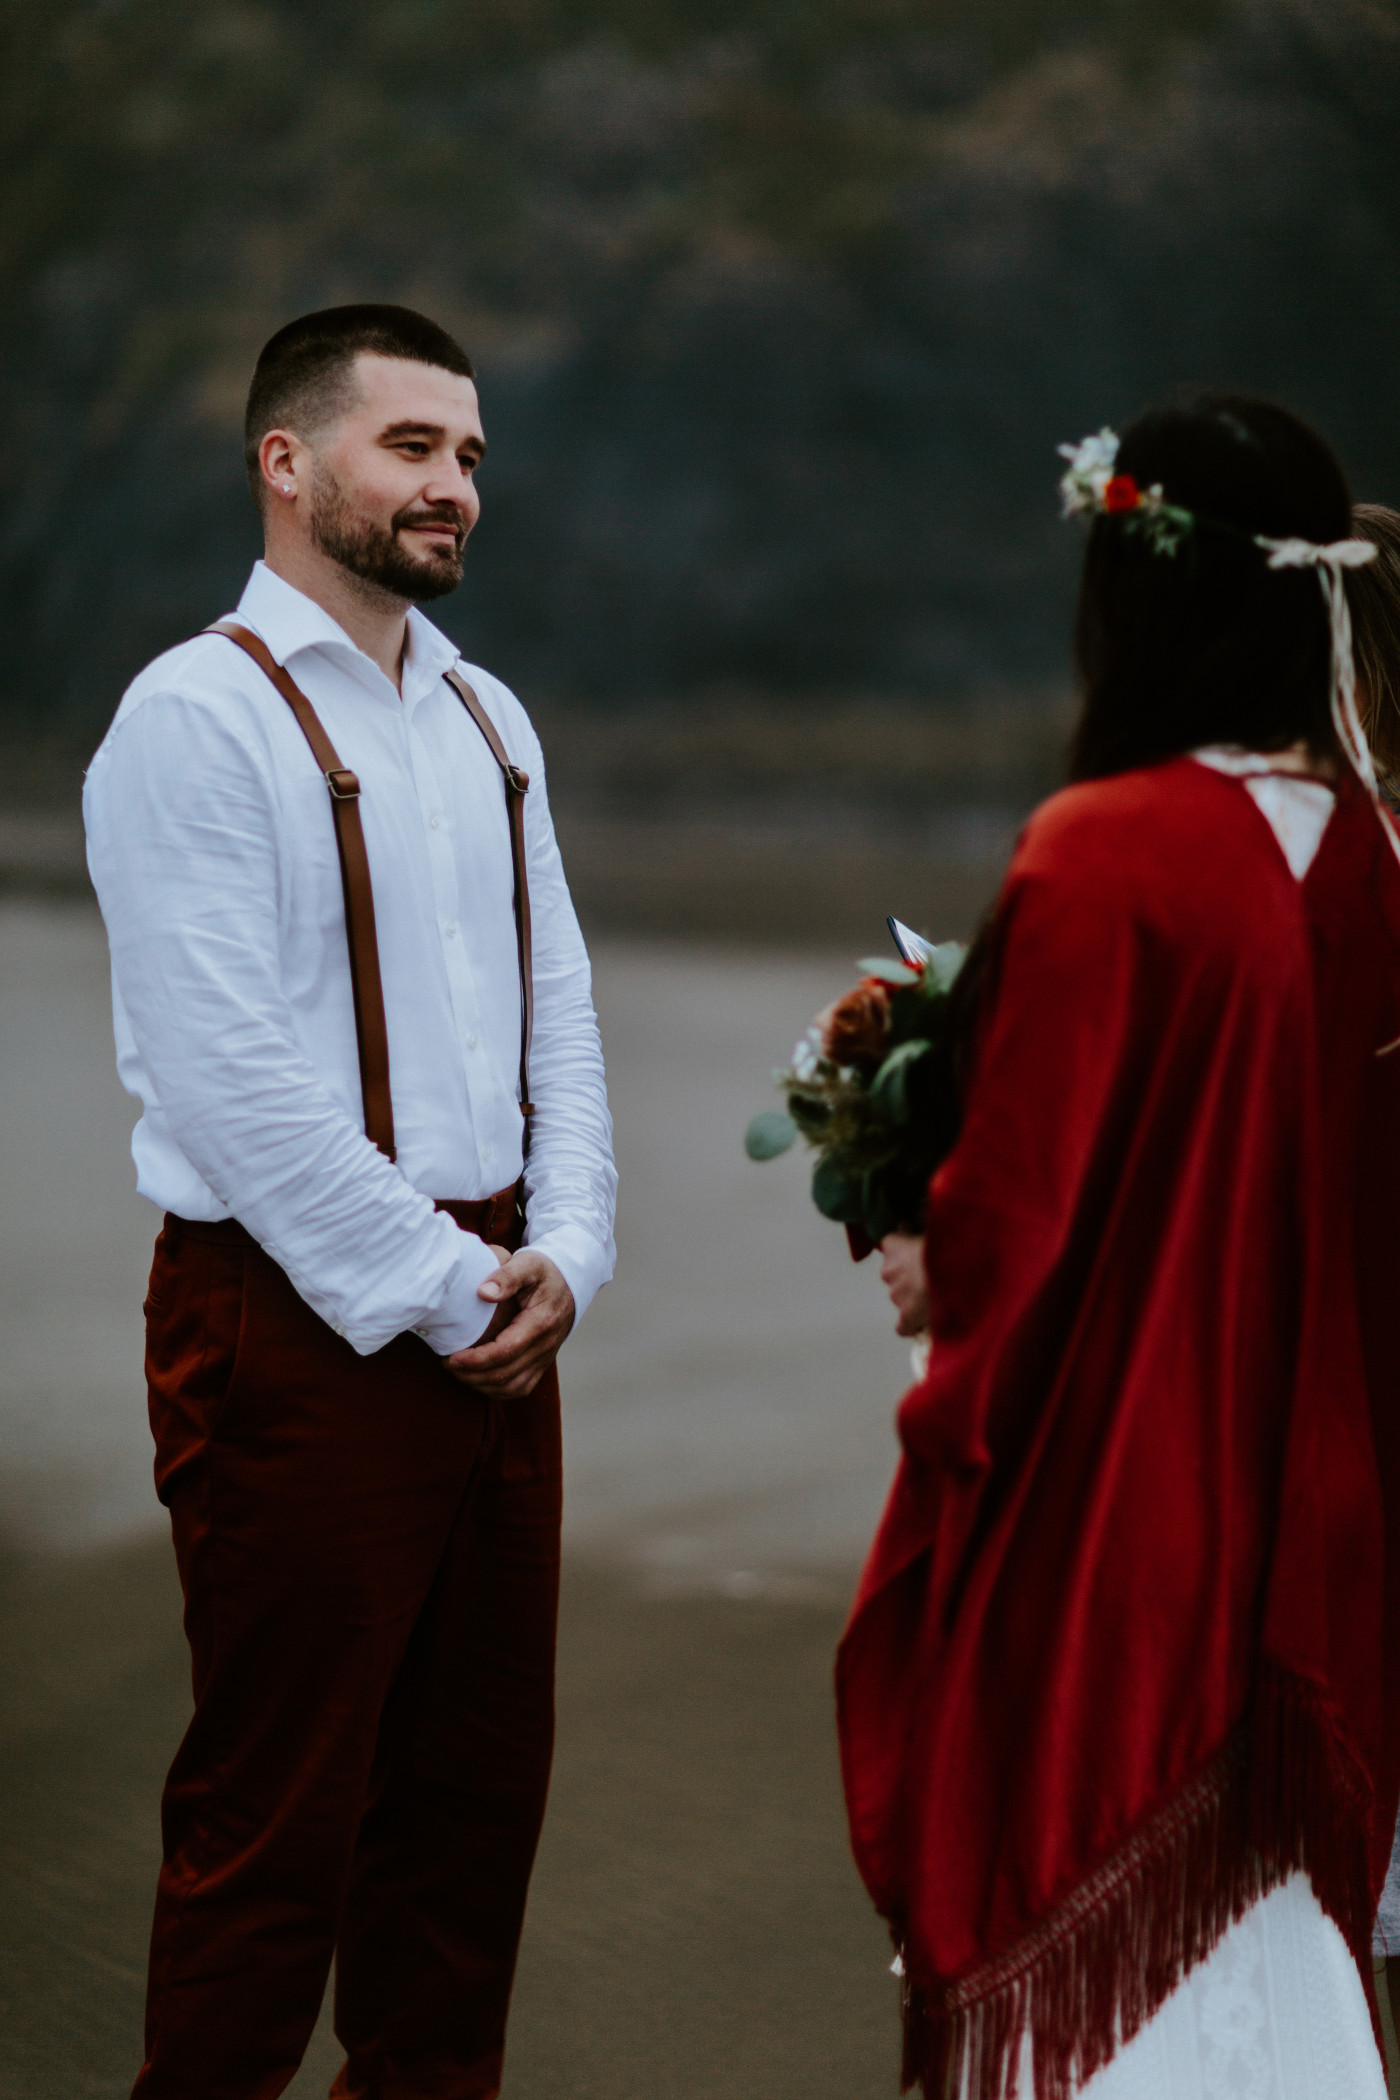 TJ smiles at Allison during their elopement.